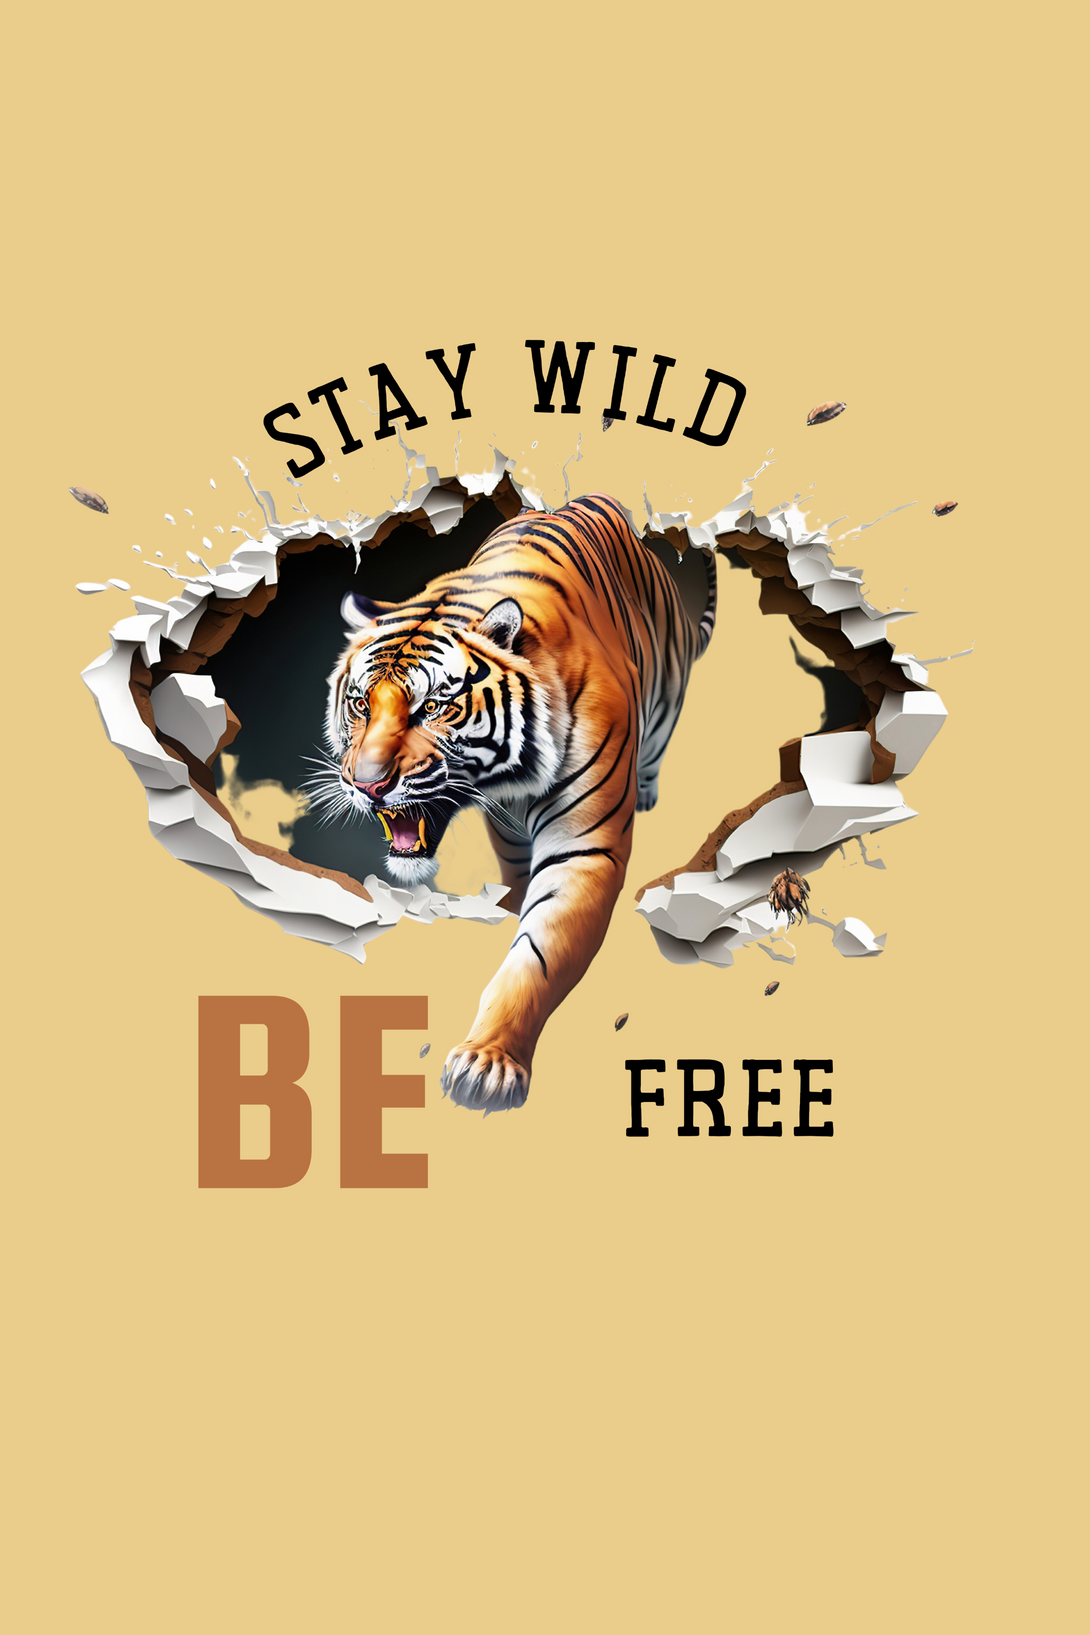 Stay Wild And Be Free Printed T-Shirt For Men - WowWaves - 1